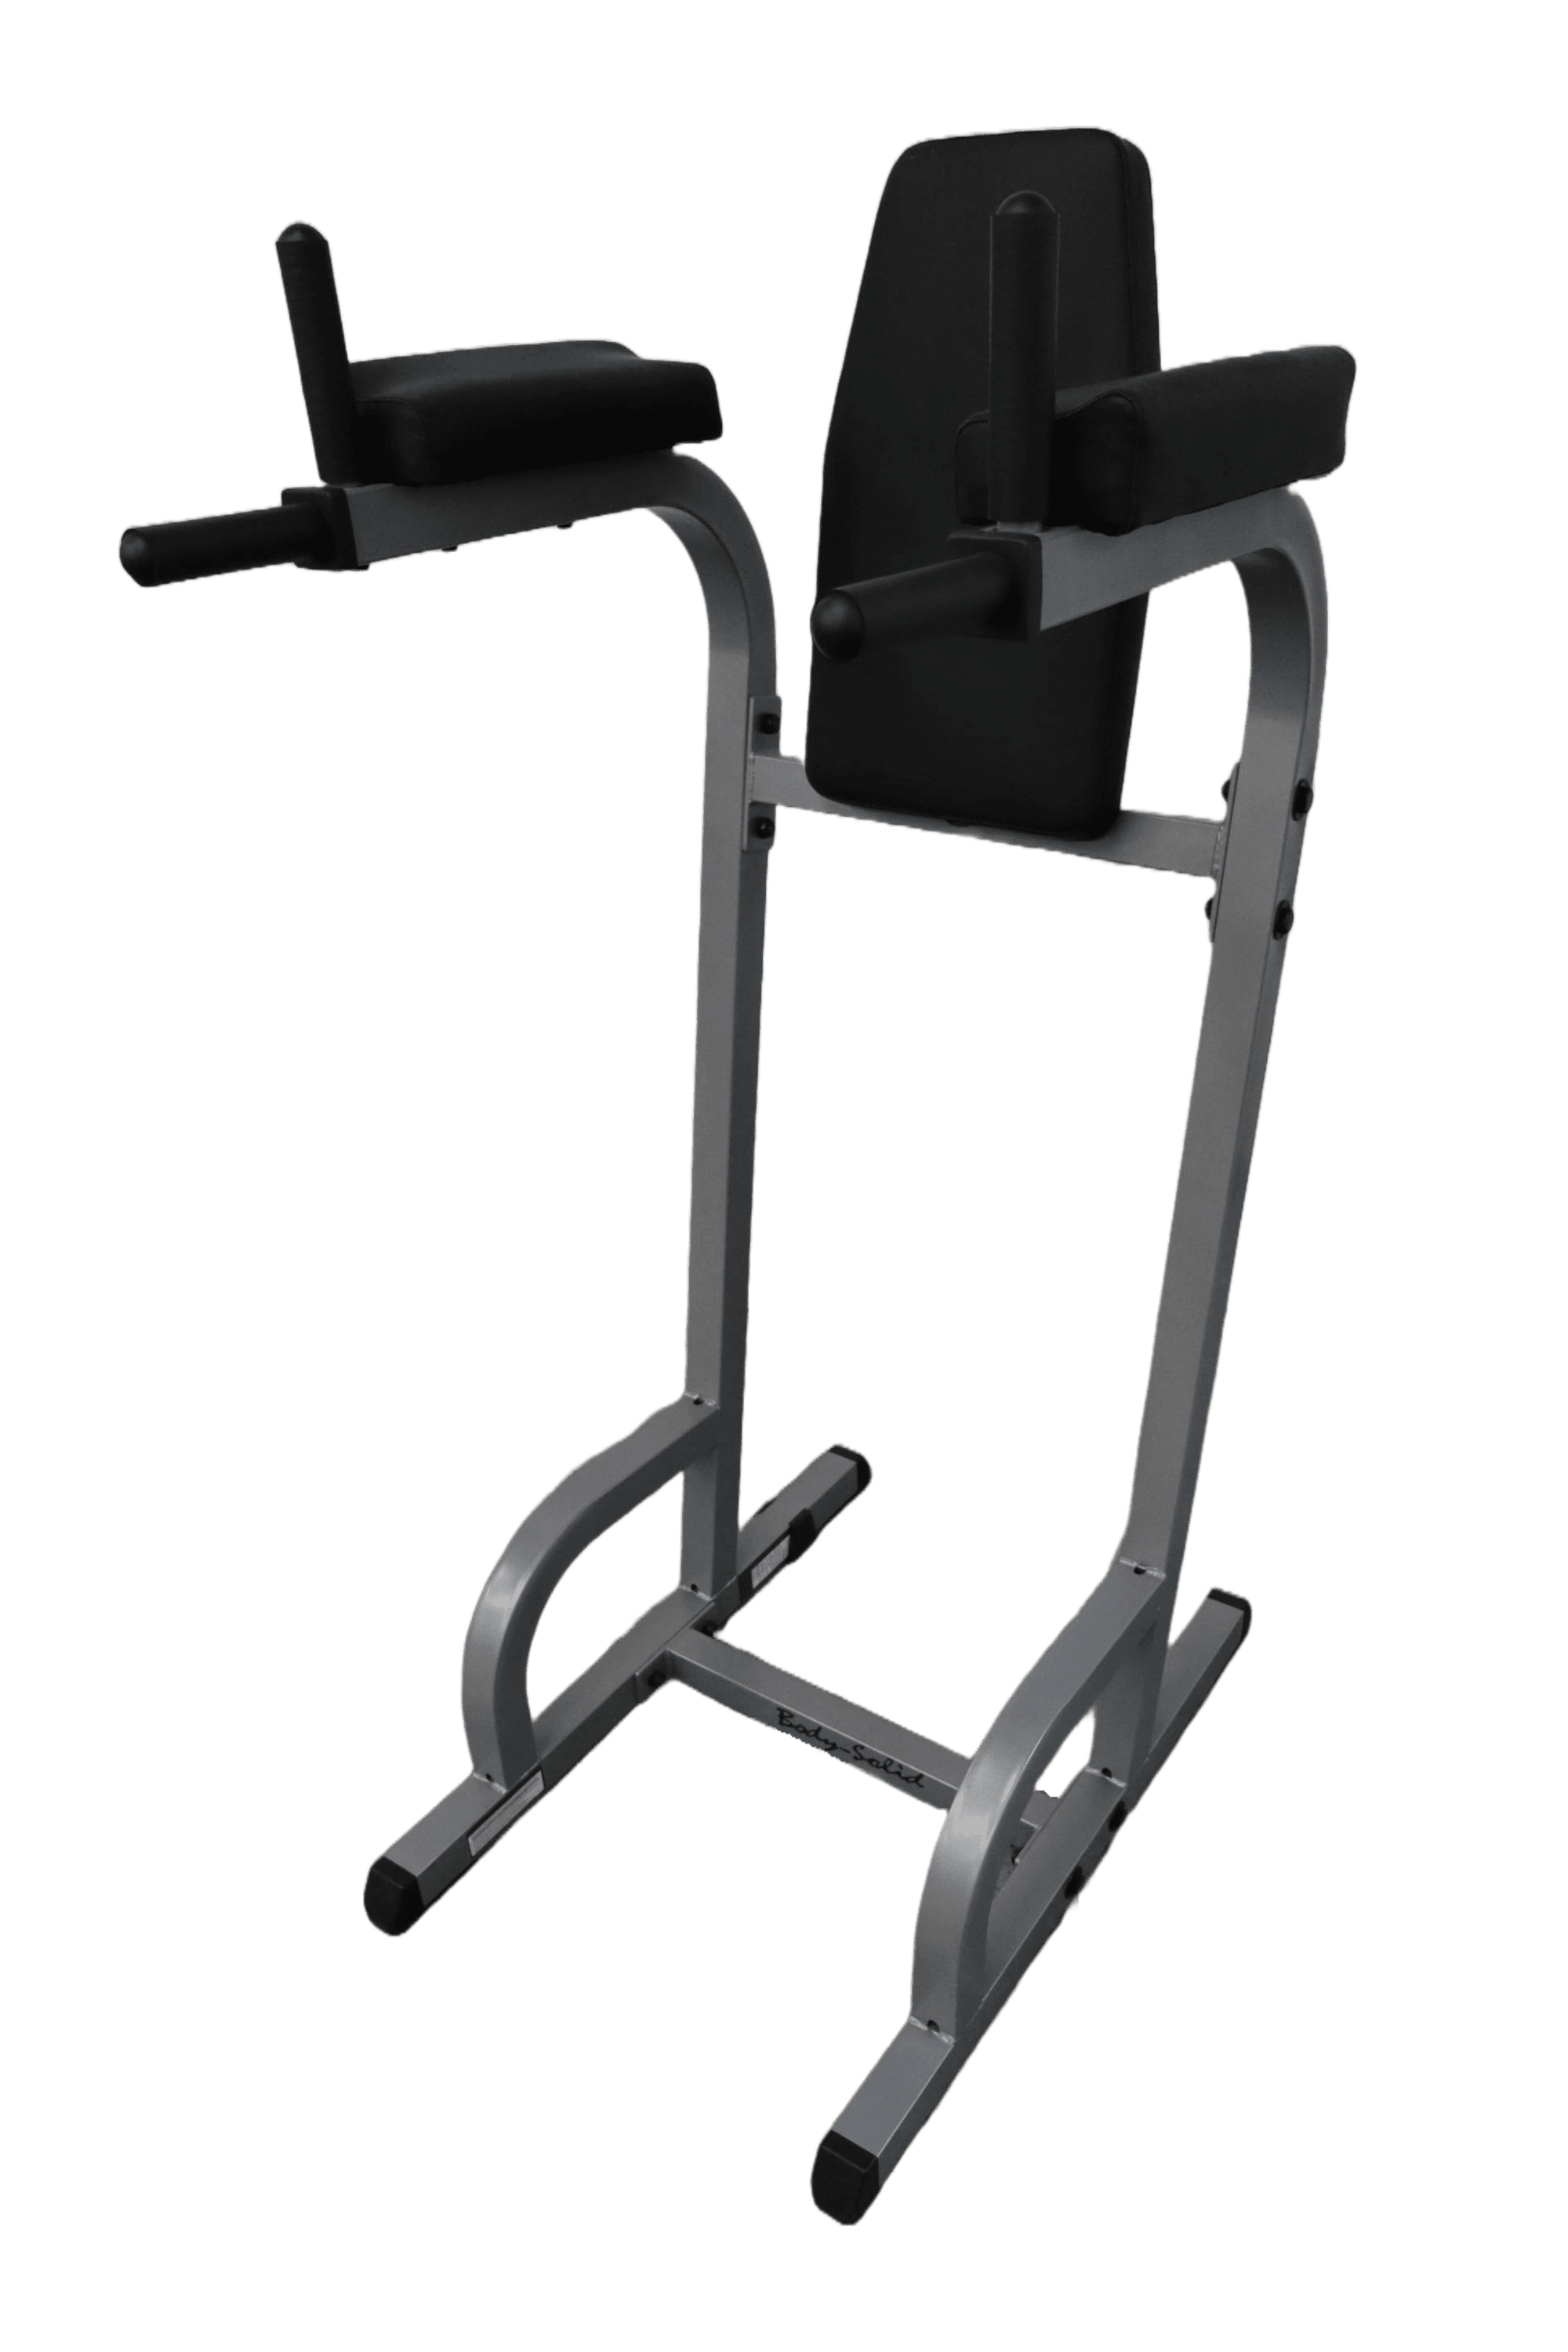 Used Body-Solid Vertical Knee Raise And Dip Stand GVKR60 Home Gym Strength System